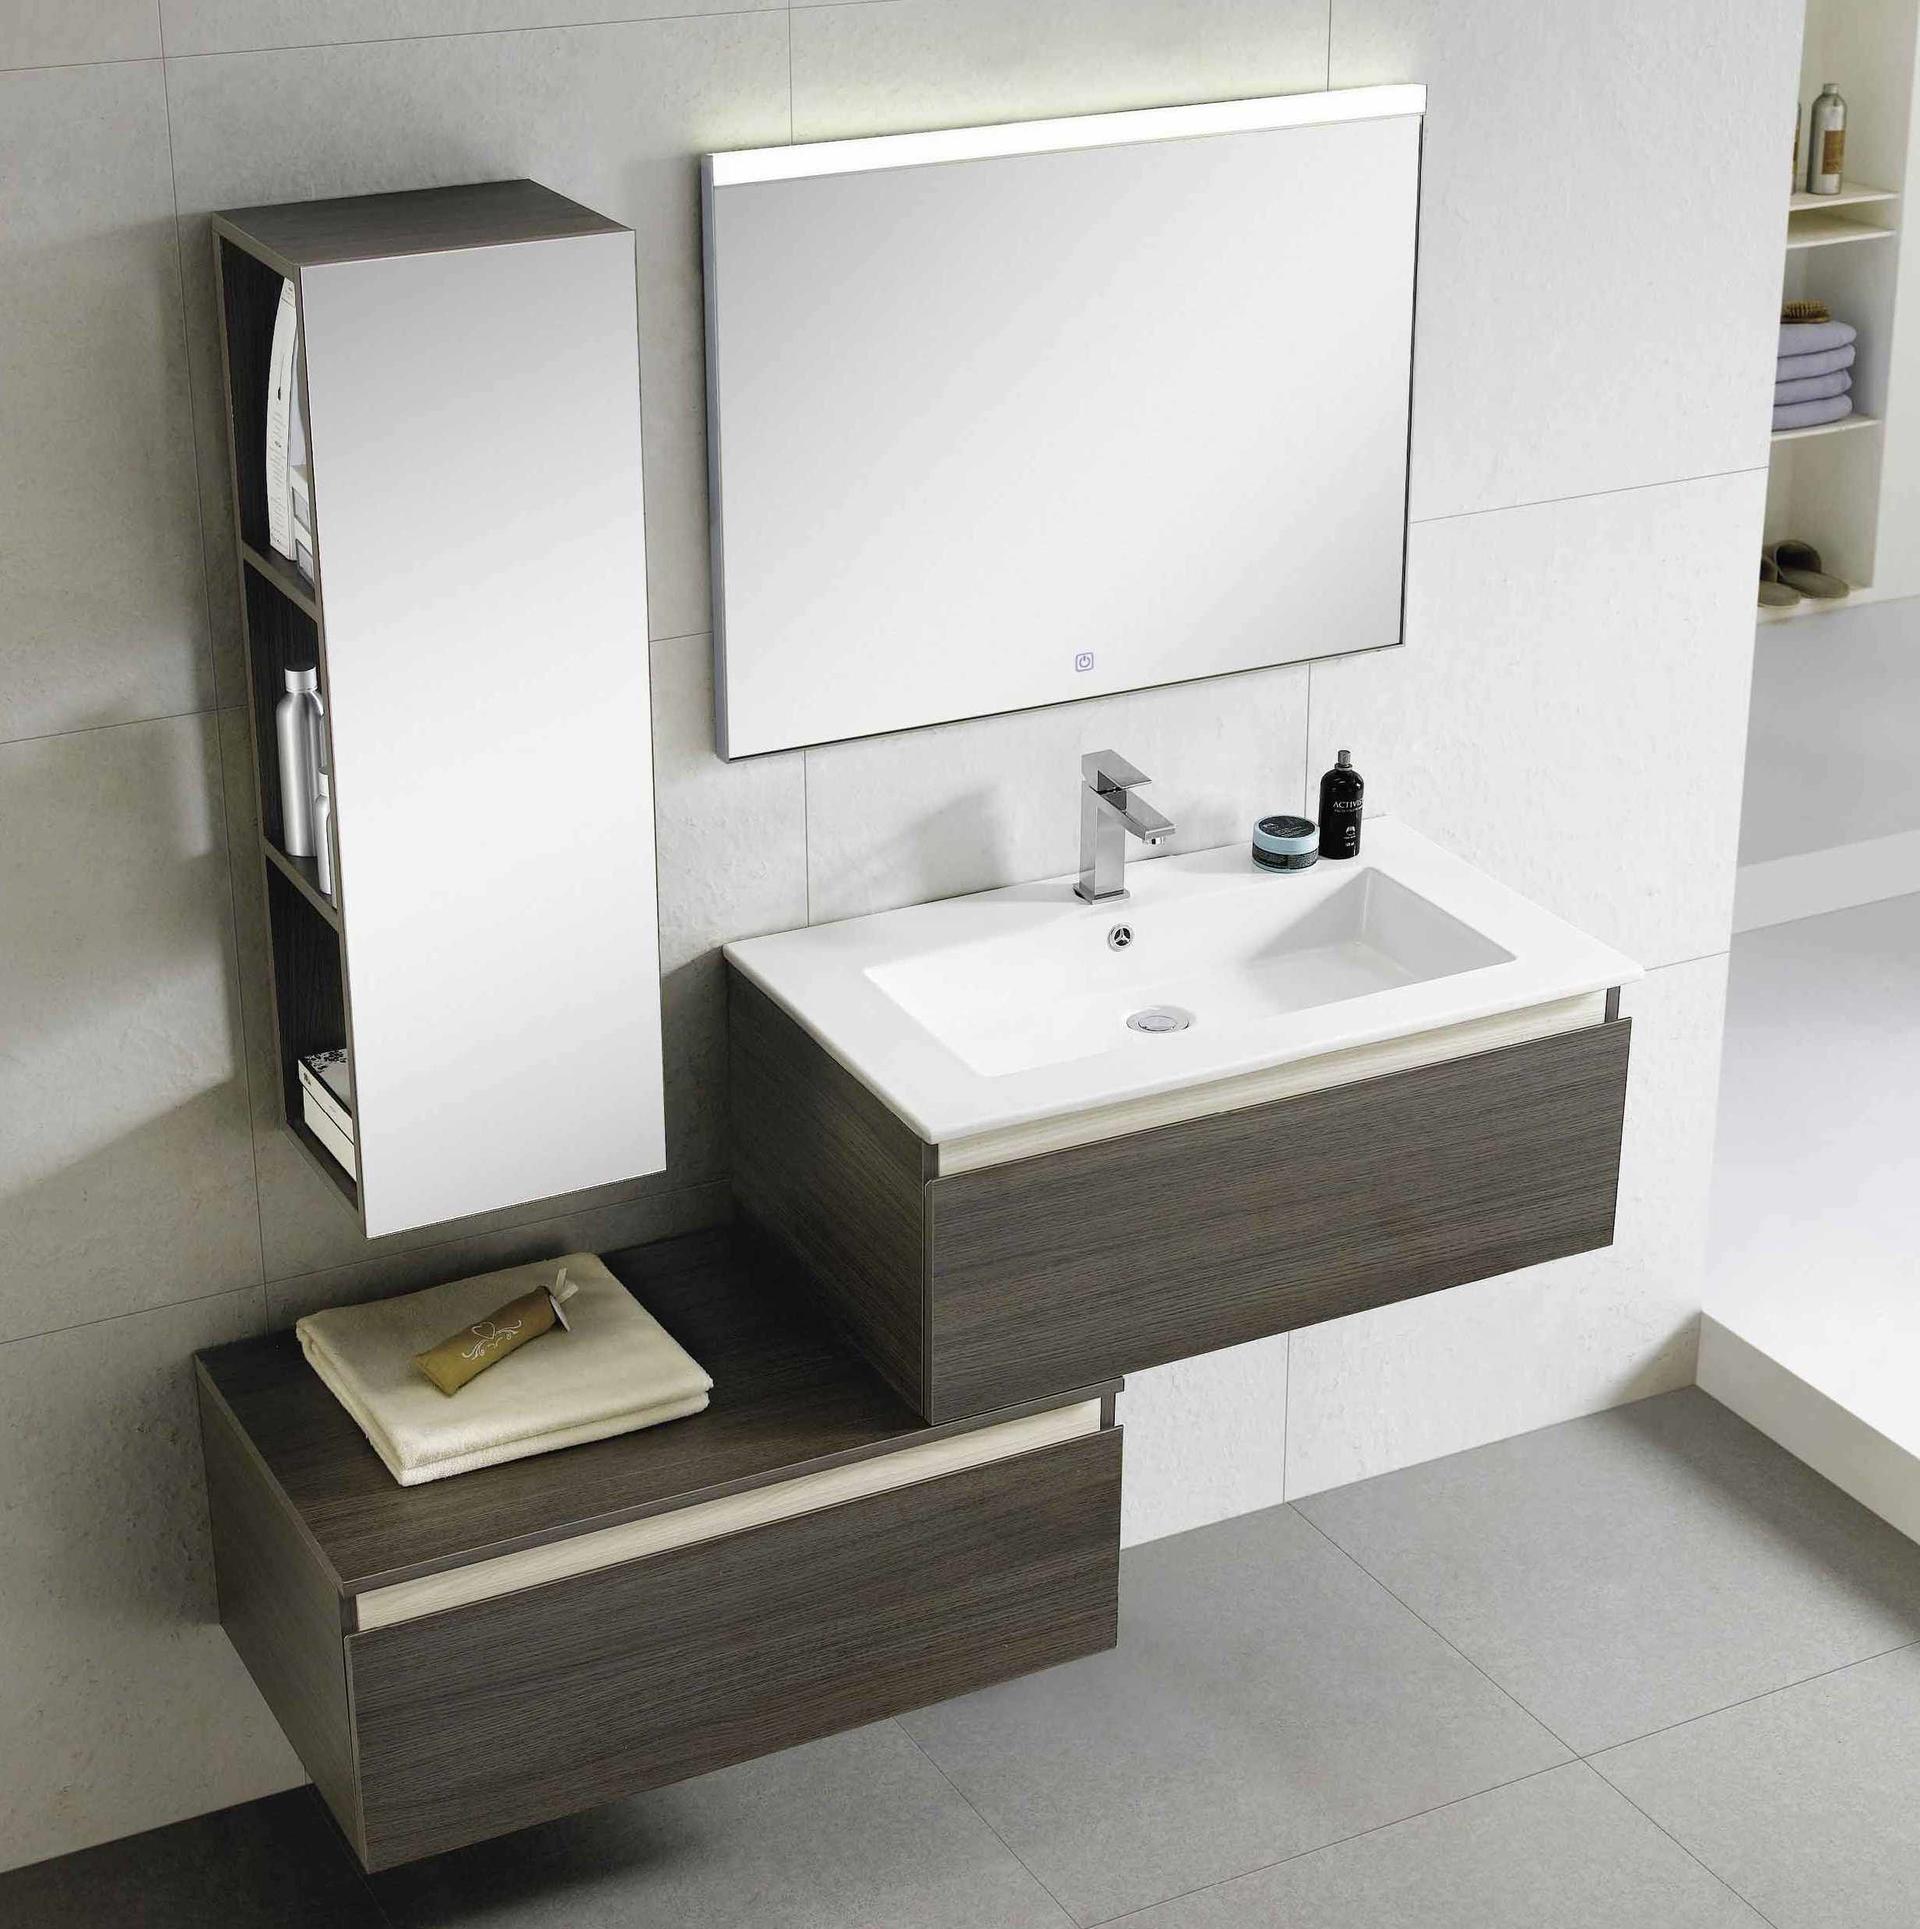 Reliable Bath Wall Cabinet Combination One Stop Services For